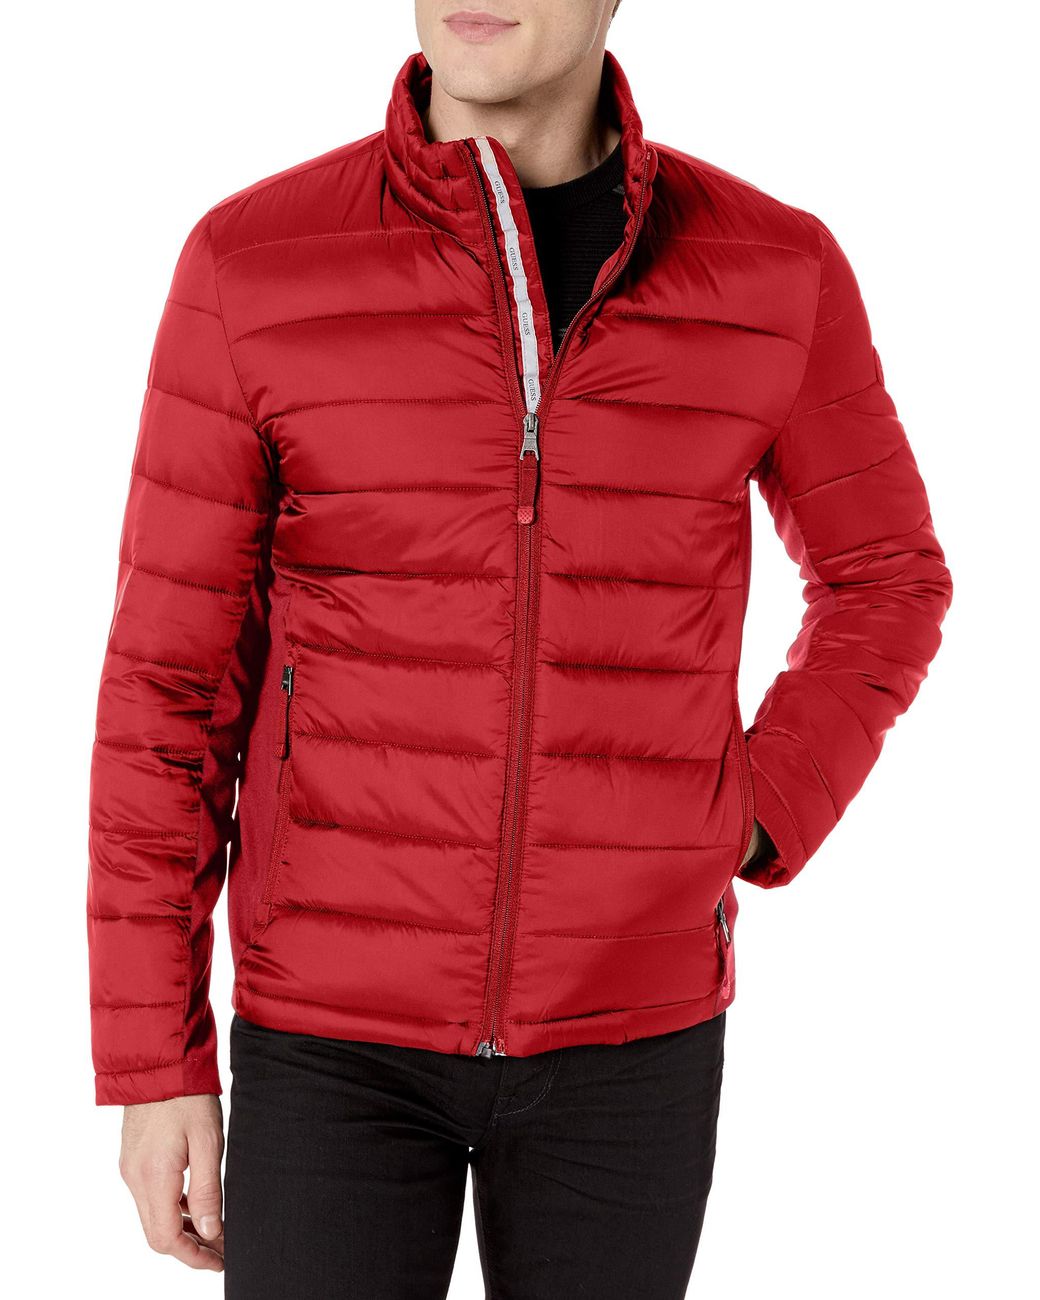 Guess Puffer Jacket in Red for Men - Lyst